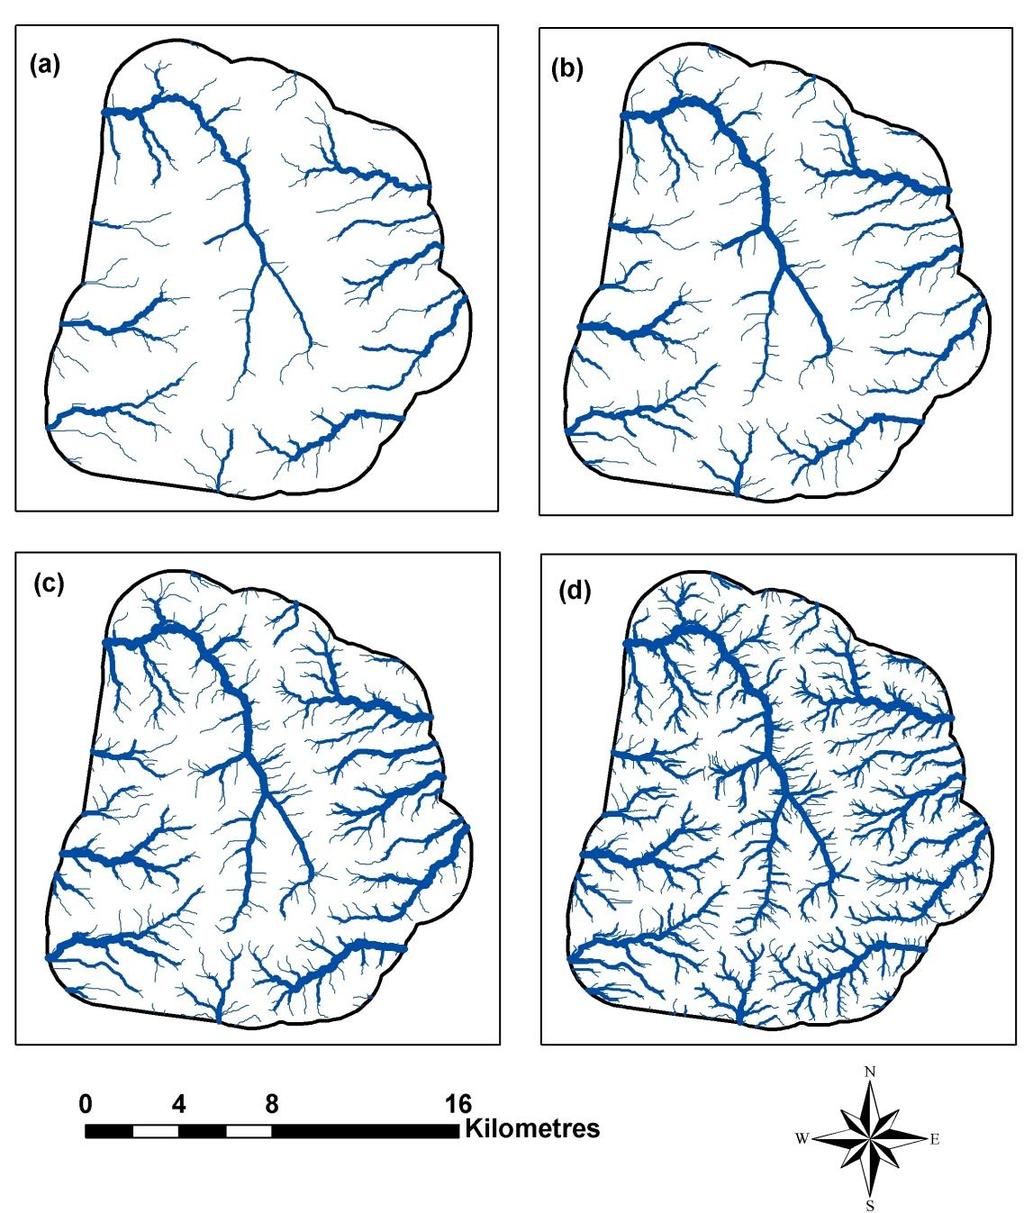 Results and discussion Drainage networks extracted from the DEM using different thresholds are shown in Figure 3.